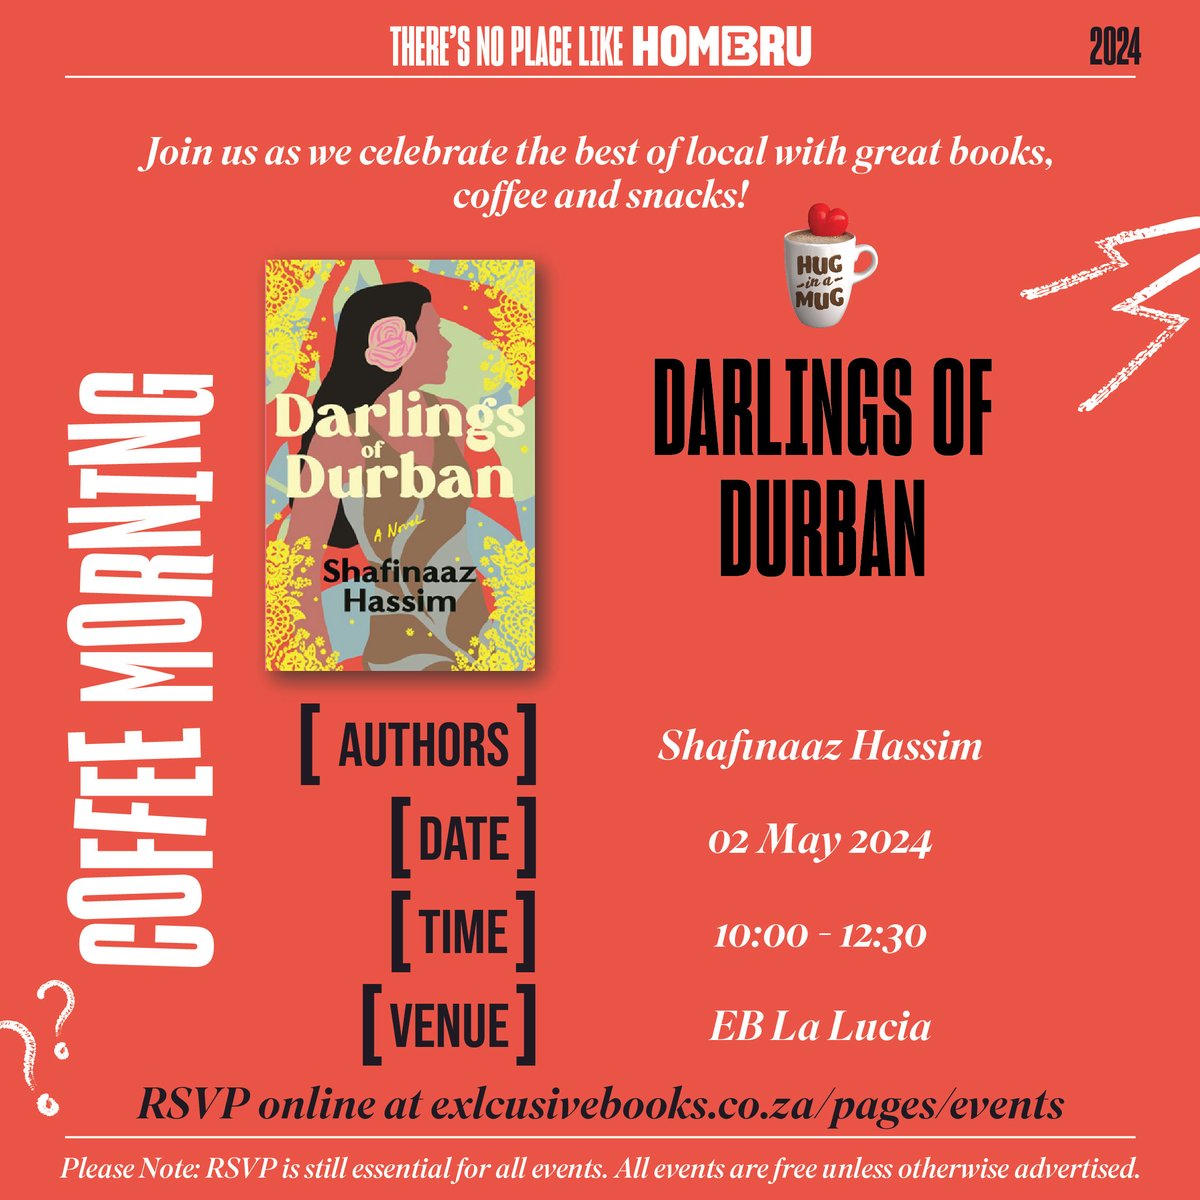 📍🗓️ Join us at EB La Lucia Mall for a Homebru Coffee Morning with Shafinaaz Hassim, author of Darlings of Durban! @NBPublishers @shafinaaz 📩 RSVP ONLINE: exclusivebooks.co.za/pages/events?e…